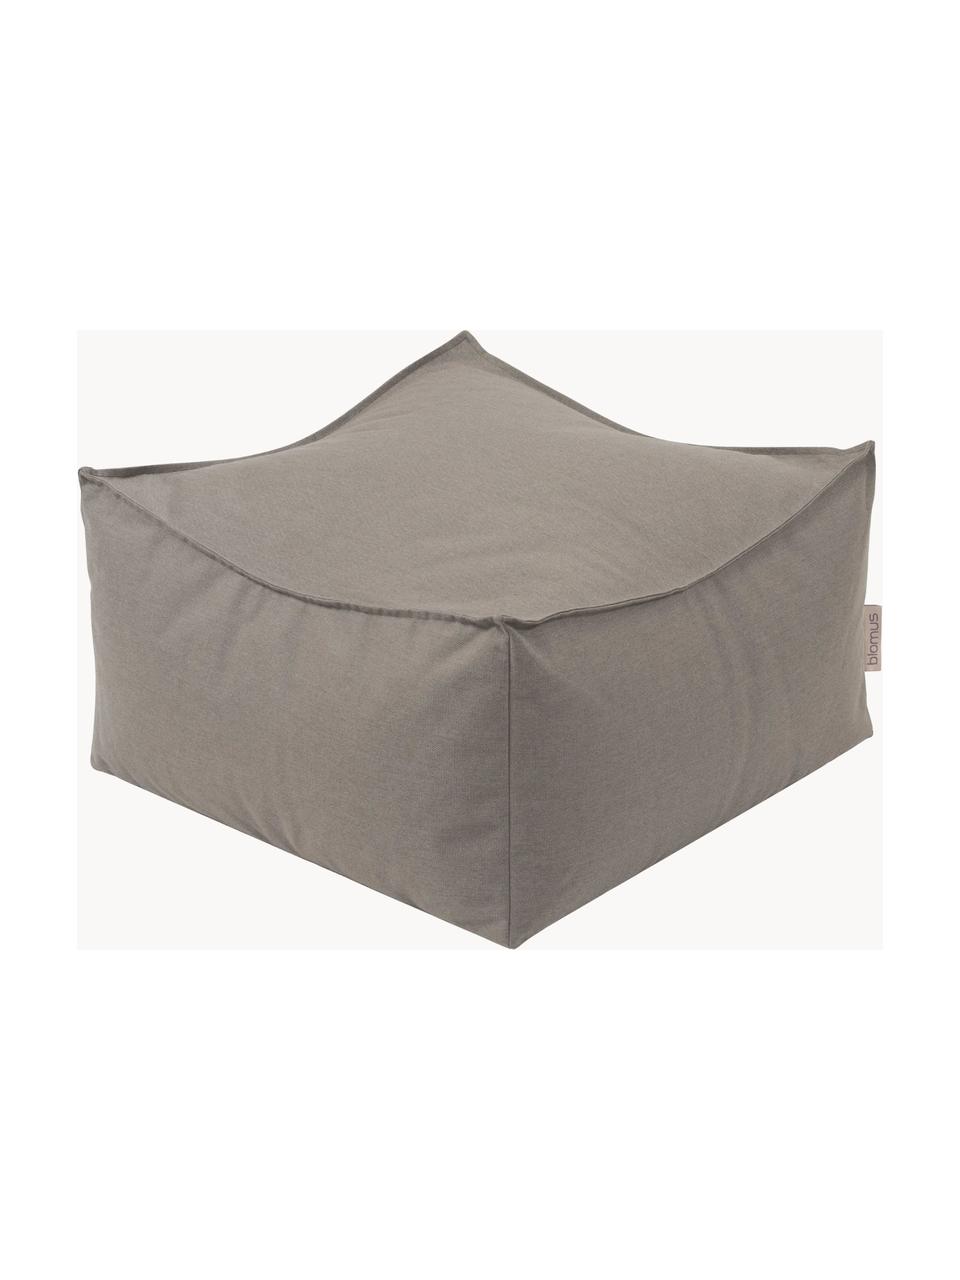 Outdoor poef Stay, Geweven stof taupe, B 60 cm x H 33 cm